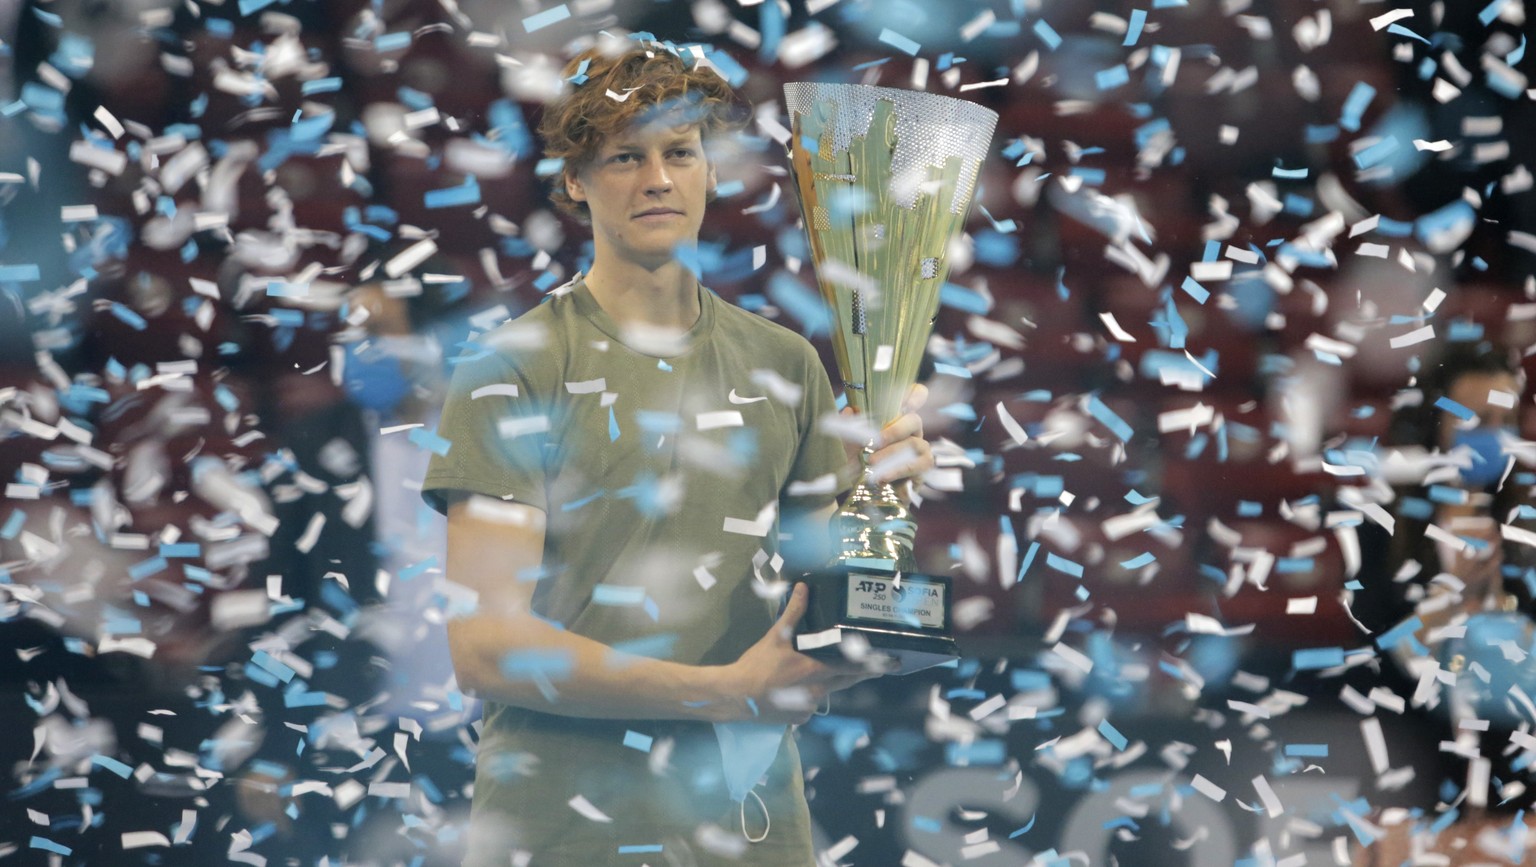 Italy&#039;s Jannik Sinner holds the trophy after winning the final match of the 2020 Sofia Open ATP 250 tennis tournament against Canada&#039;s Vasek Pospisil, in Sofia, Bulgaria, Saturday, Nov. 14,  ...